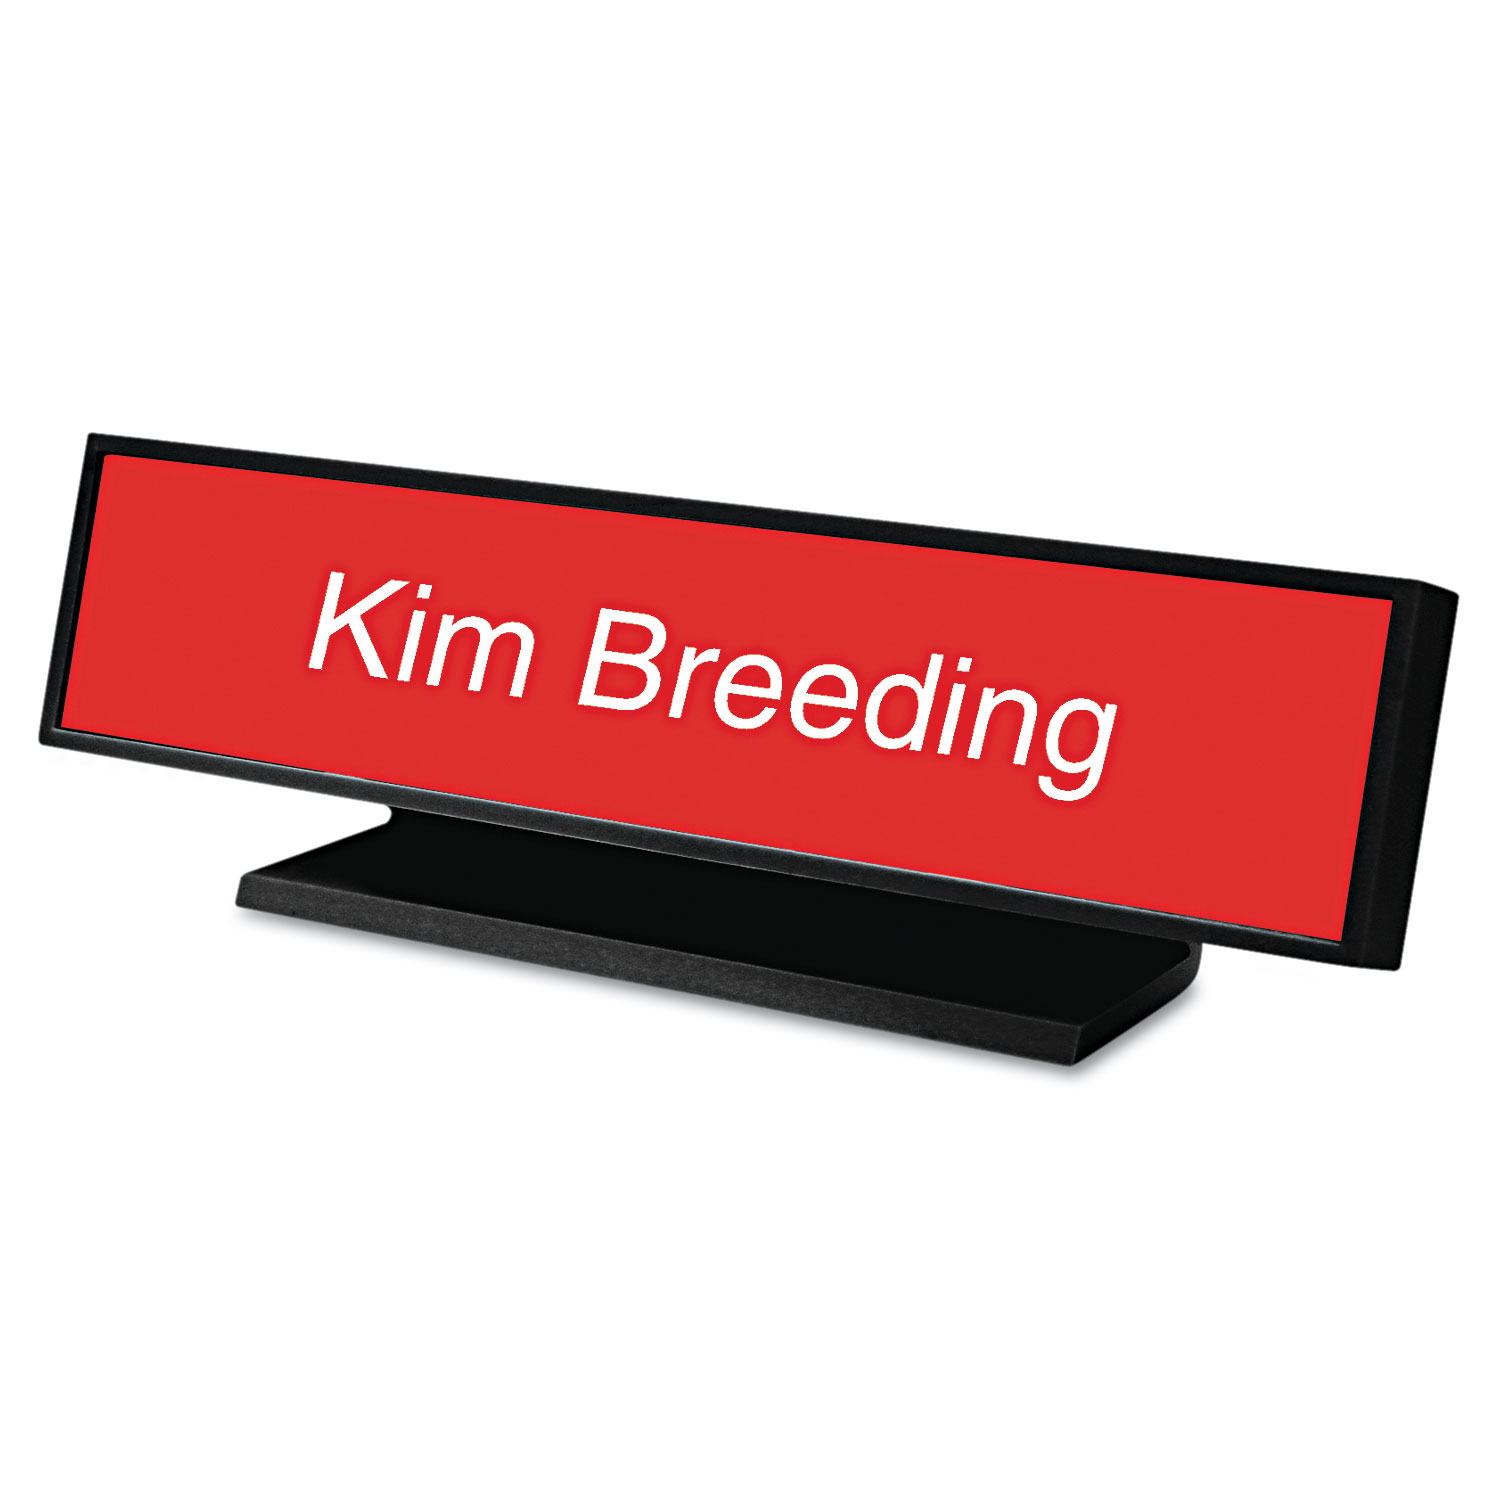  Identity Group 5703 Architectural Desk Sign with Name Plate, Black, Radius Edge (USS5703) 